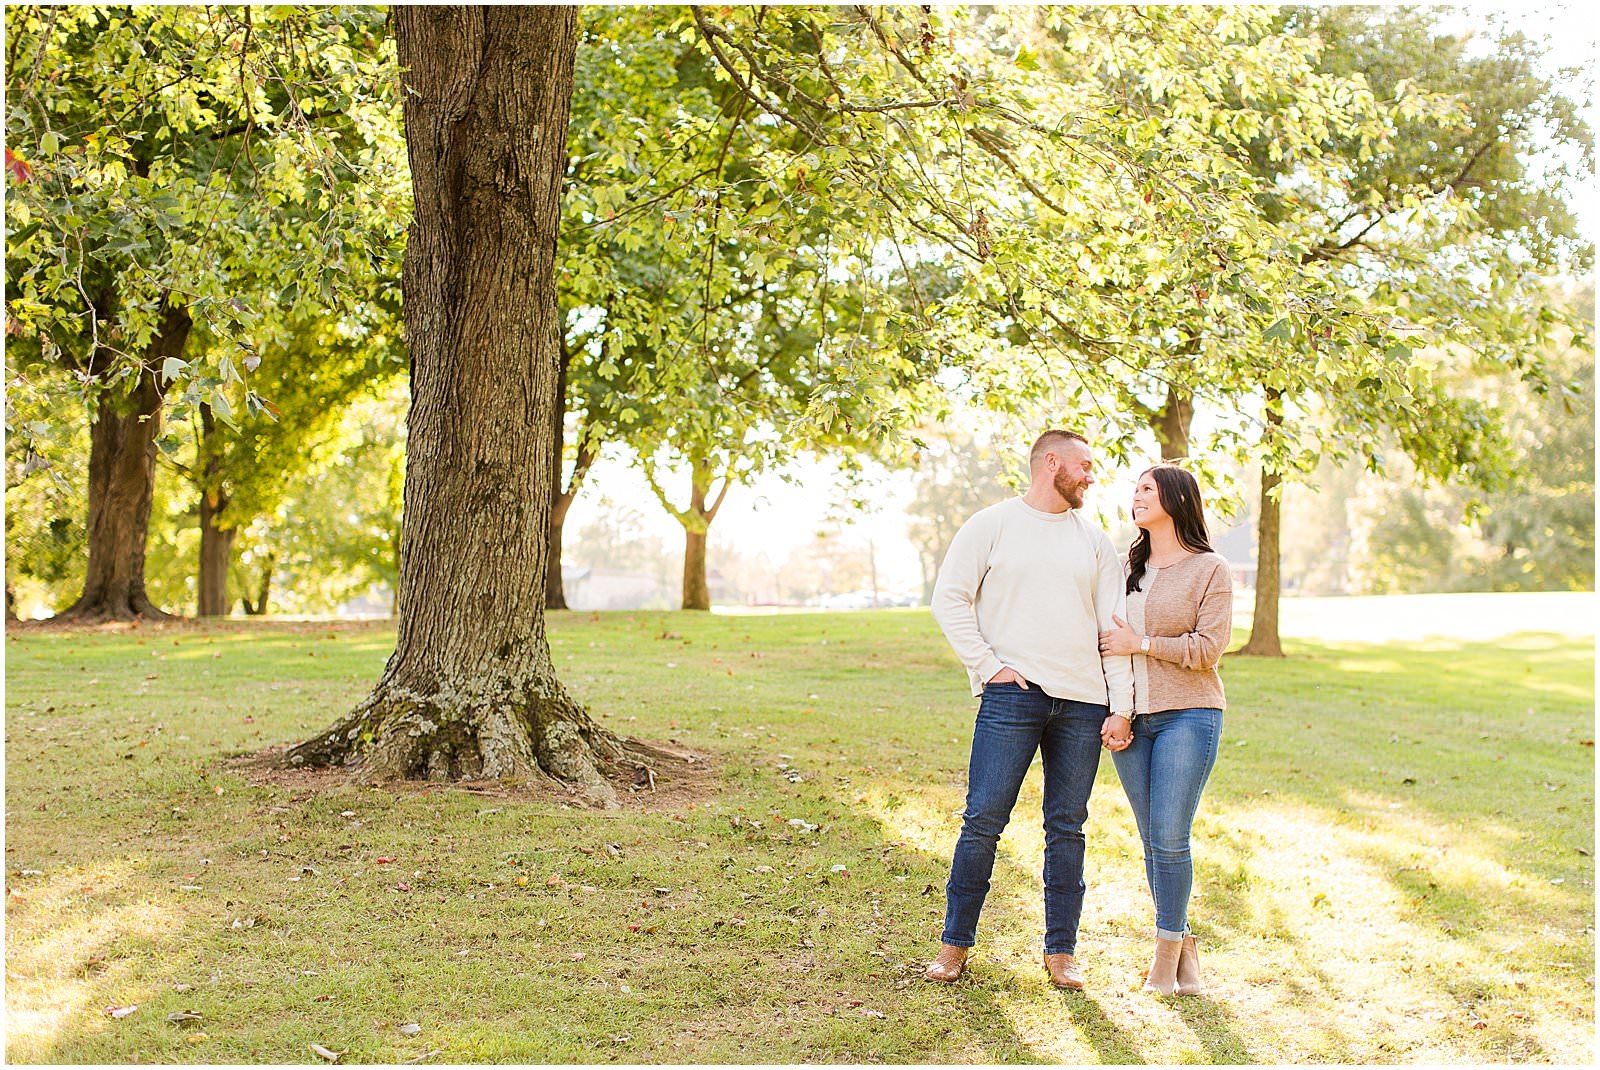 A Rolling Hills Country Club Engagement Session | Meagan and Kyle | Bret and Brandie Photography 0017.jpg